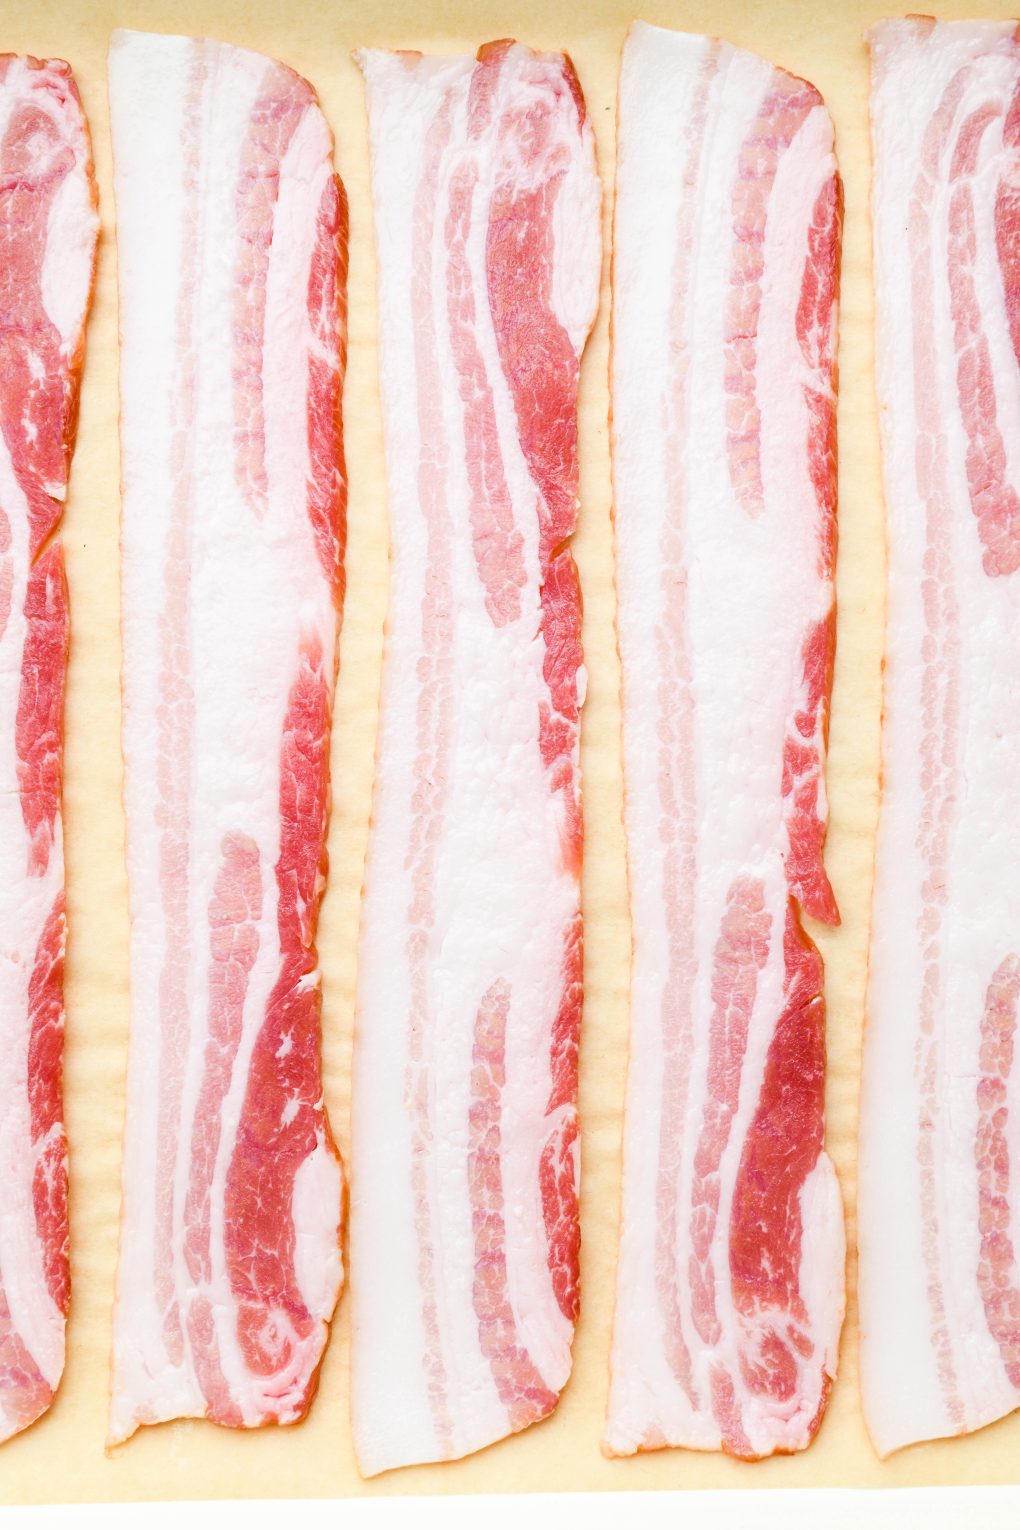 Close up of raw bacon slices on a white baking sheet lined with parchment paper